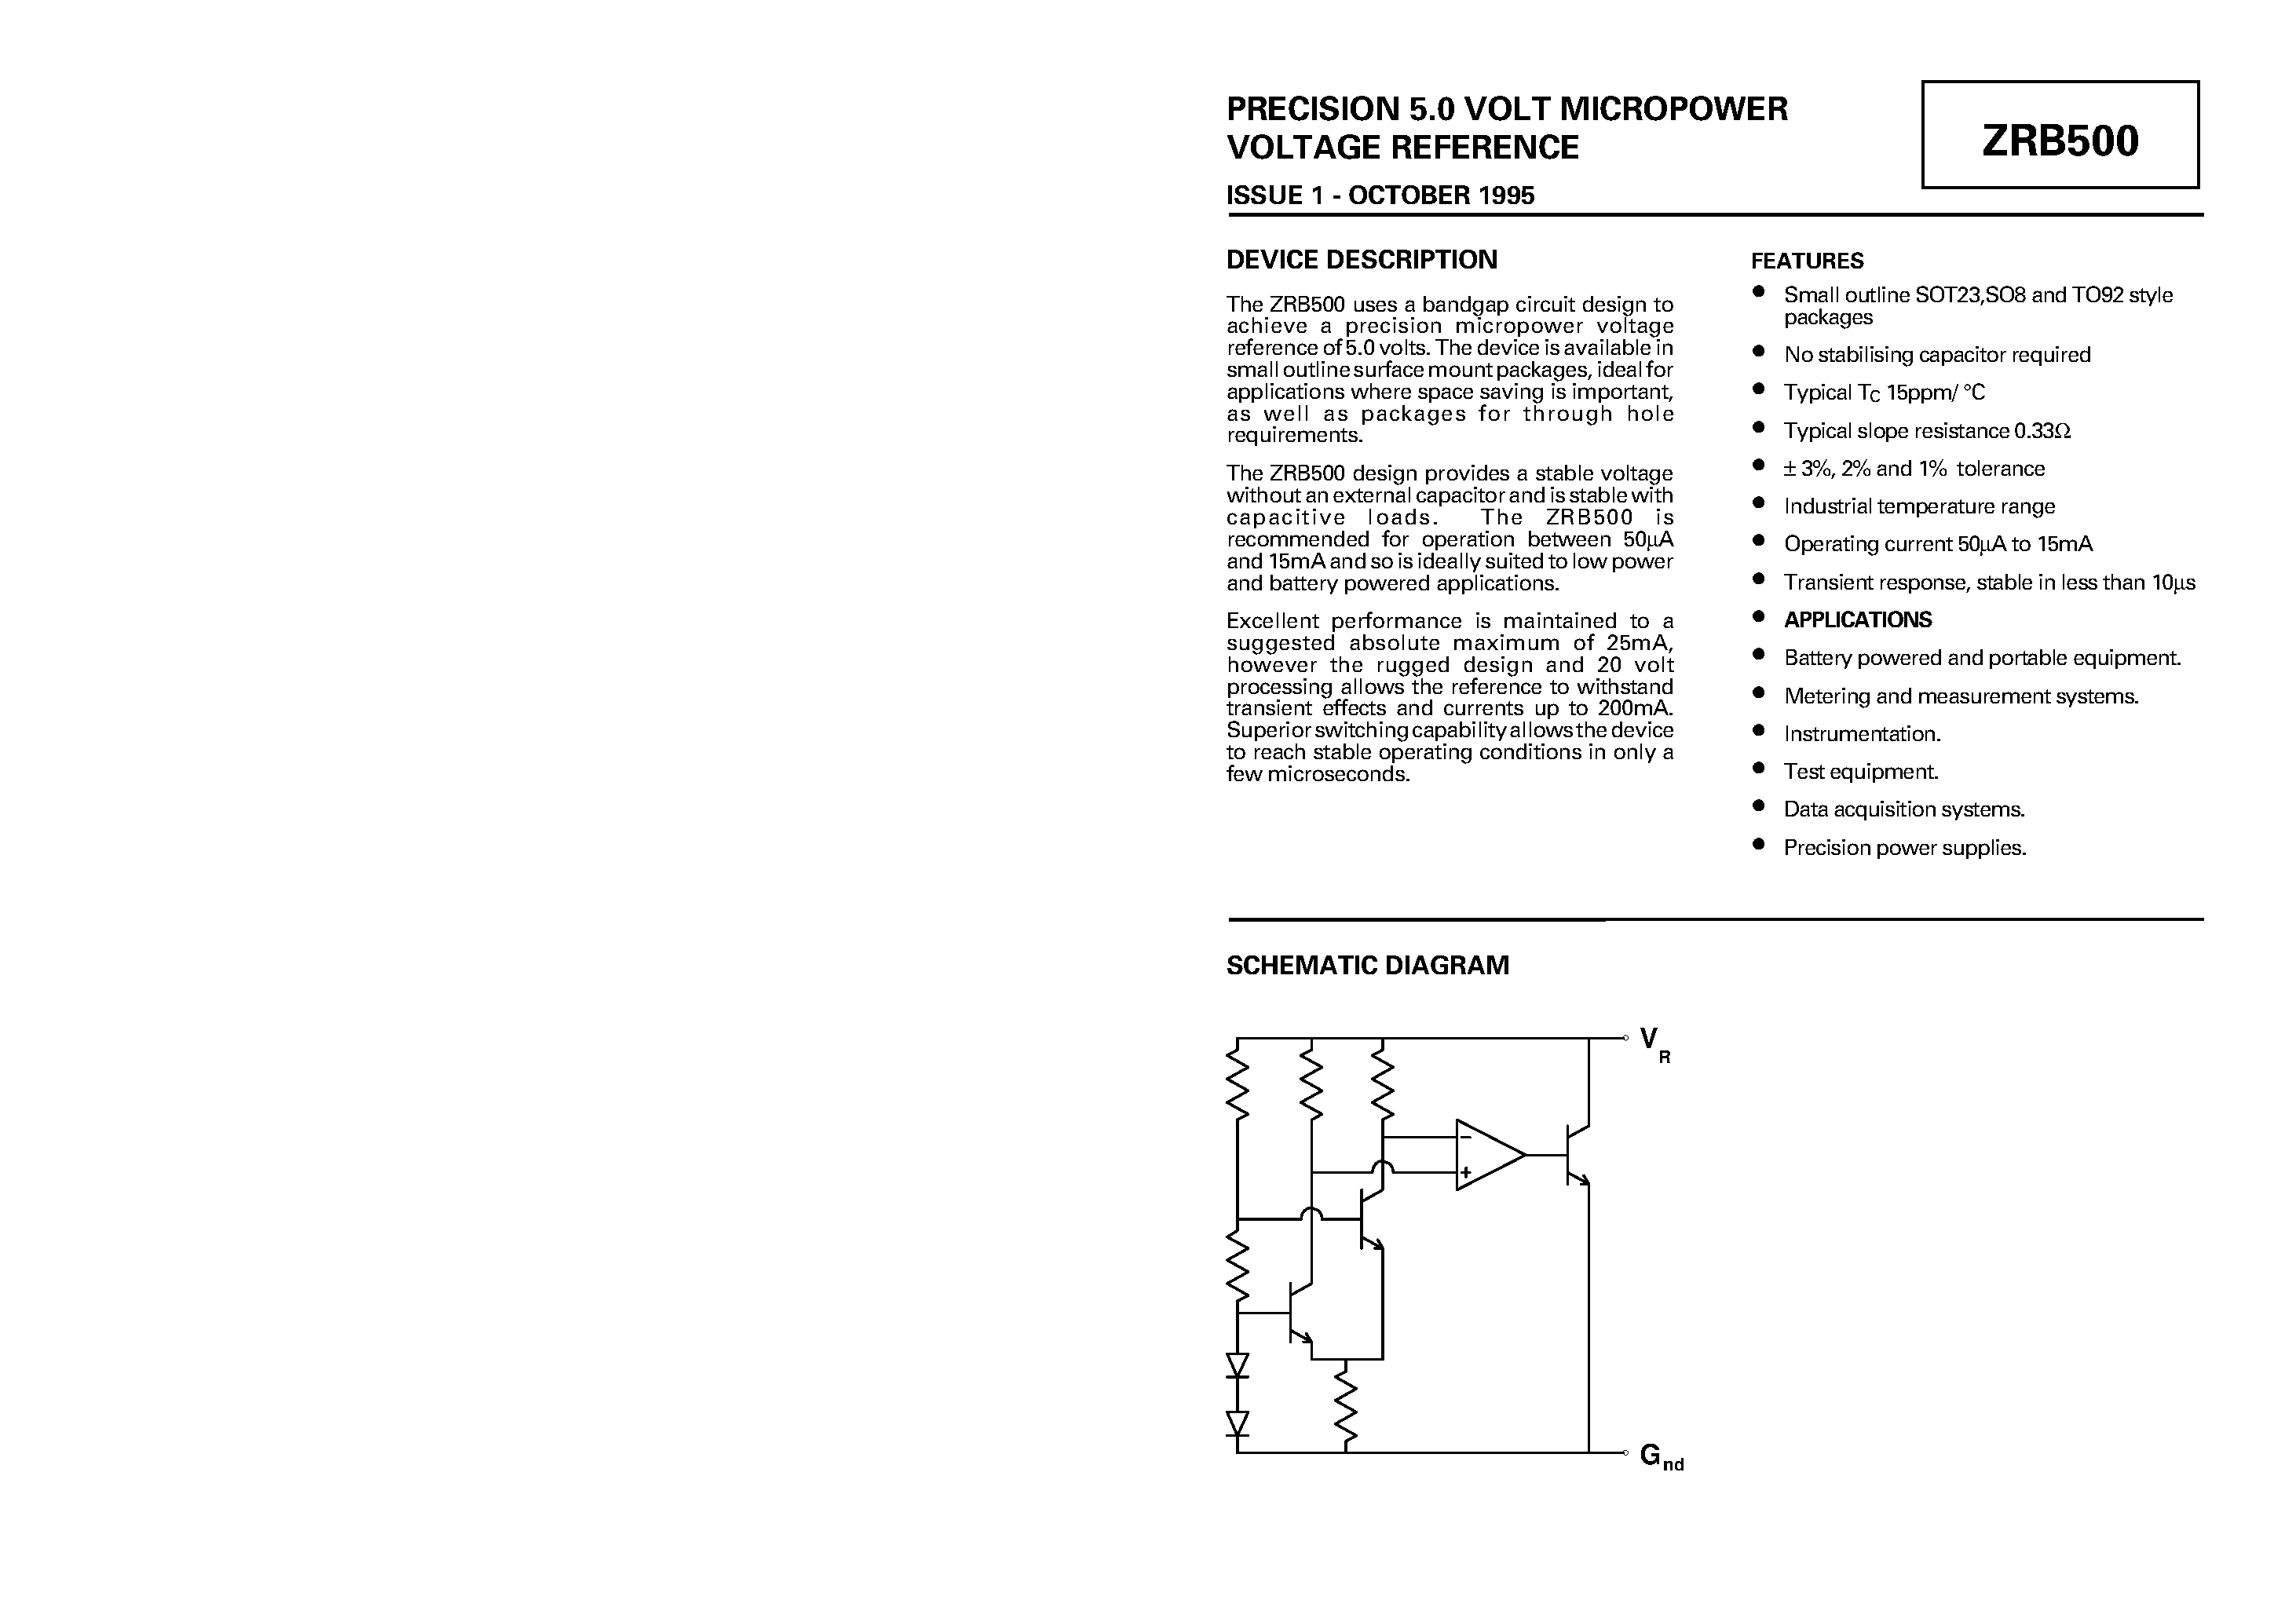 Datasheet ZRB500R03 - PRECISION 5.0 VOLT MICROPOWER VOLTAGE REFERENCE page 1